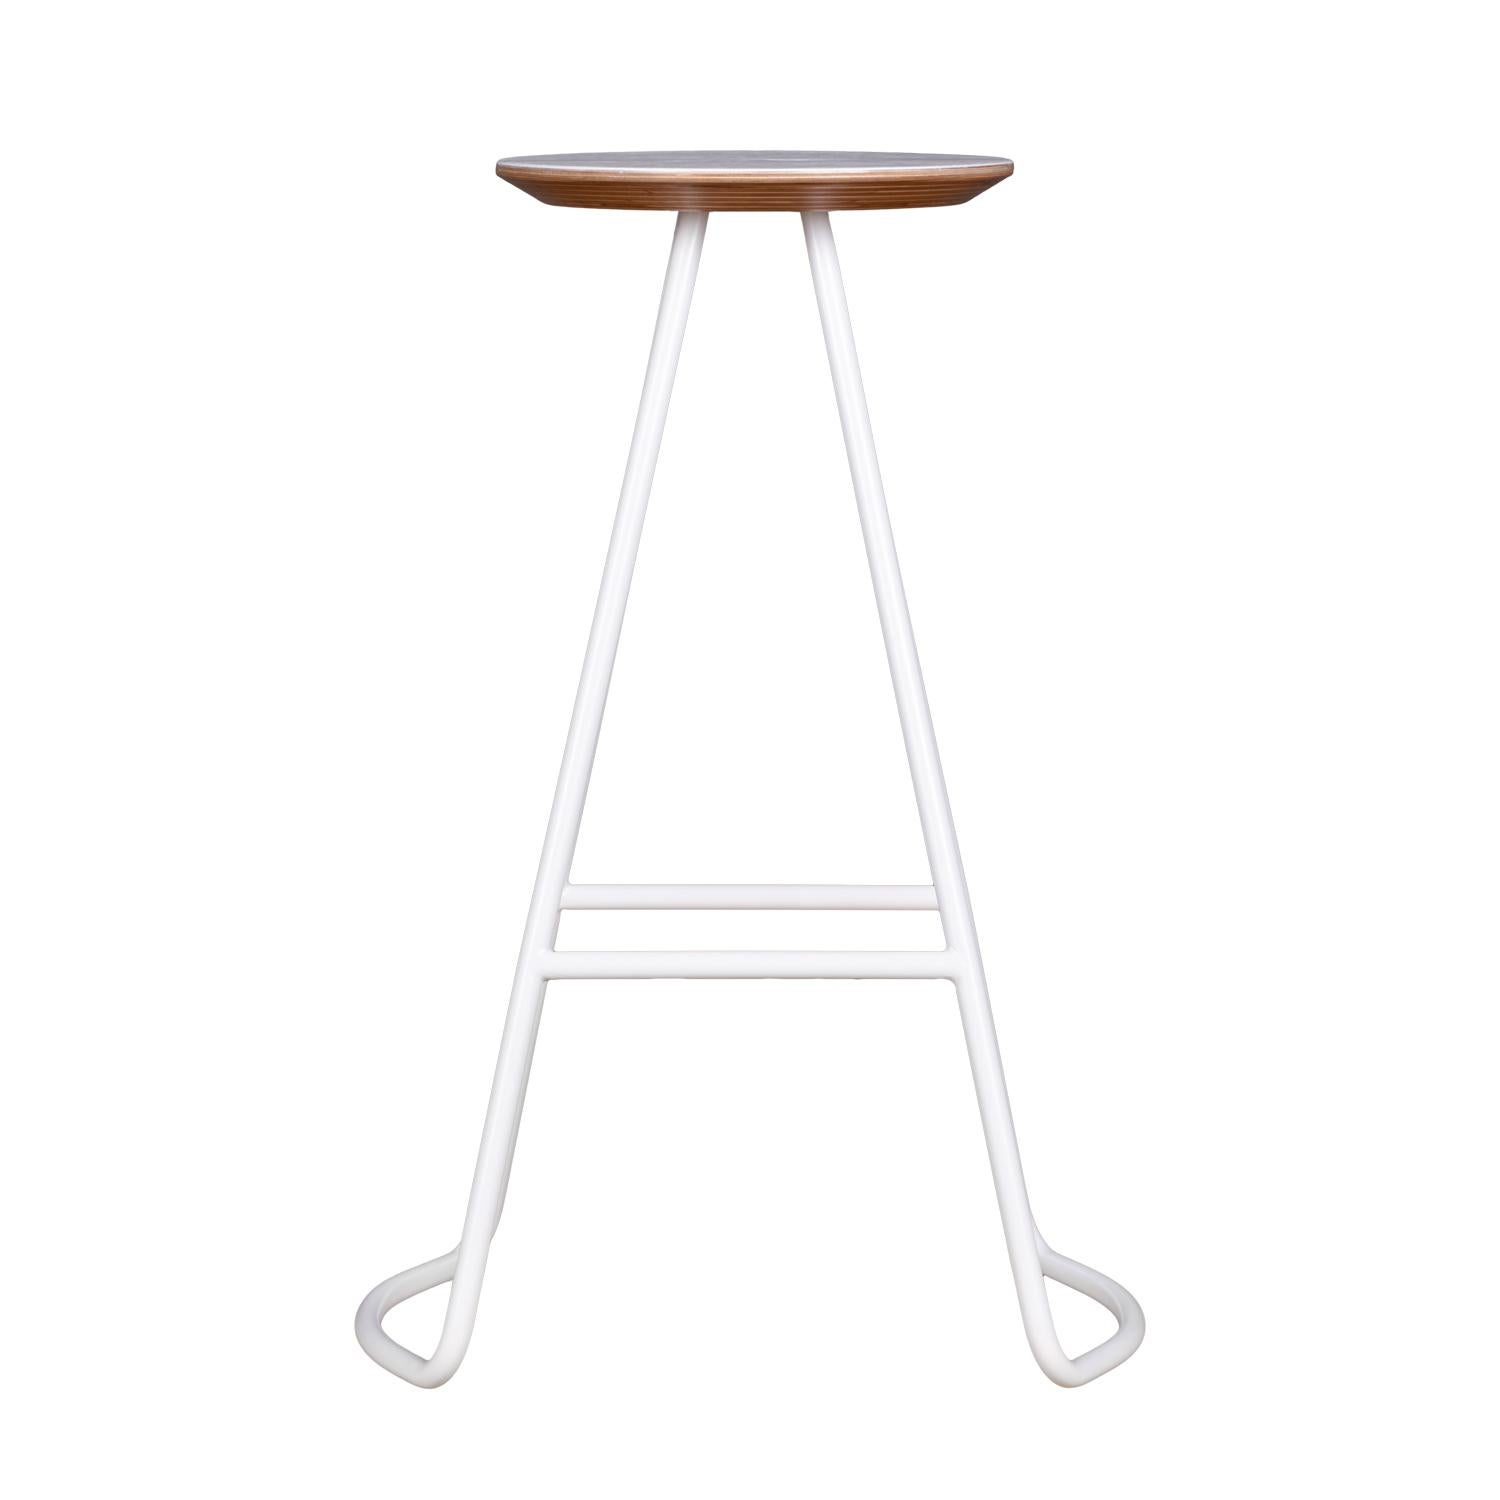 Sama high stool is part of the Sama collection, which provides functionality through simple, yet striking and sculptural forms that add a unique and elegant touch to its environment.

Inspired by the poetry of whirling costumes worn in Sama